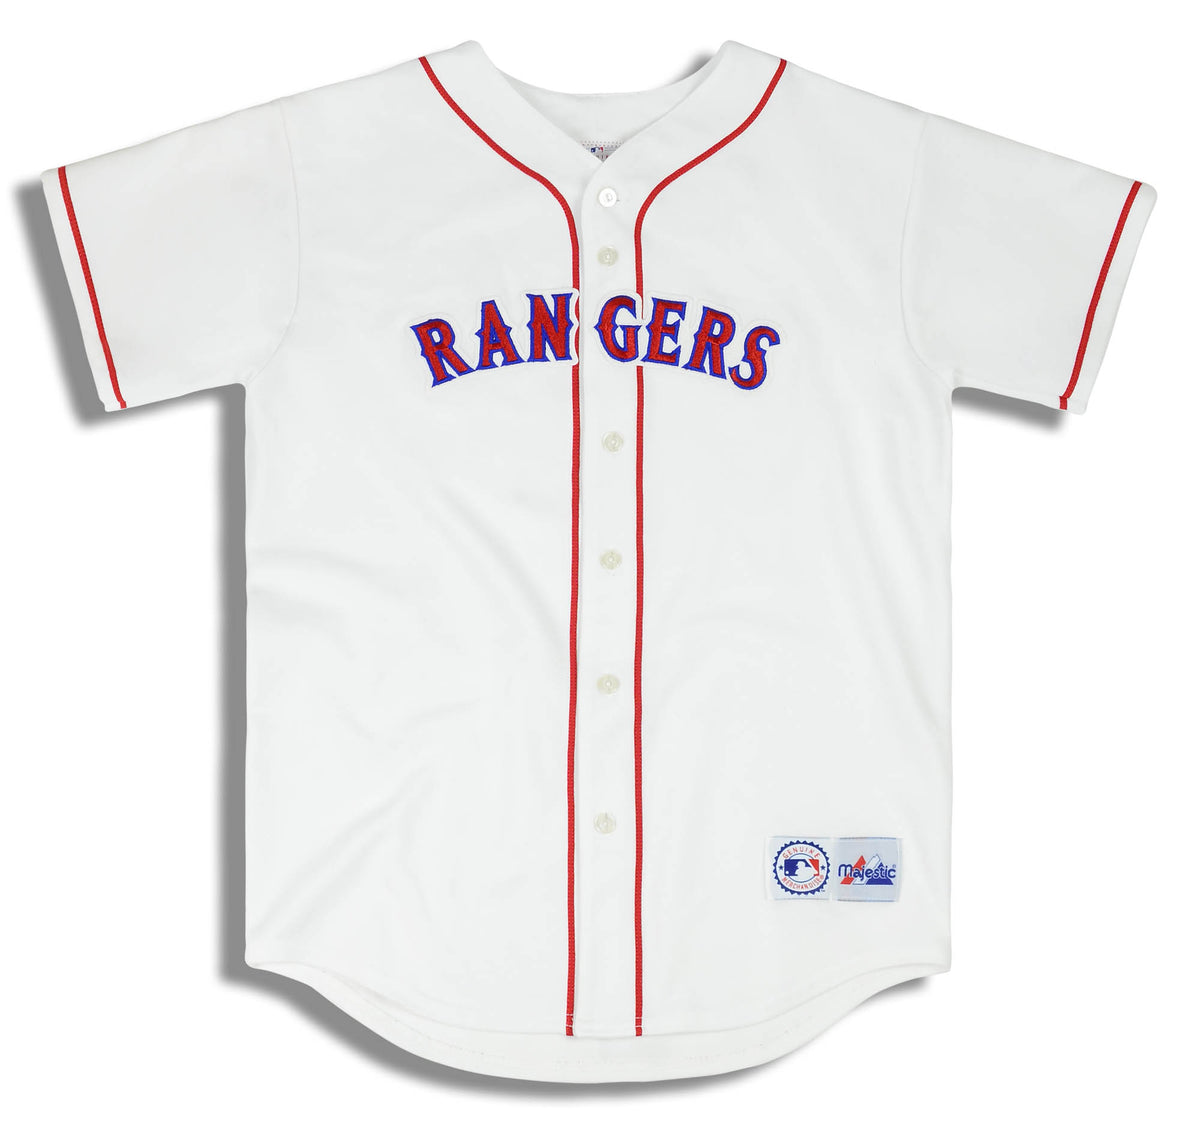 Texas Rangers Genuine MLB Majestic Cool Base Kids Youth Size Rougned Odor  Jersey